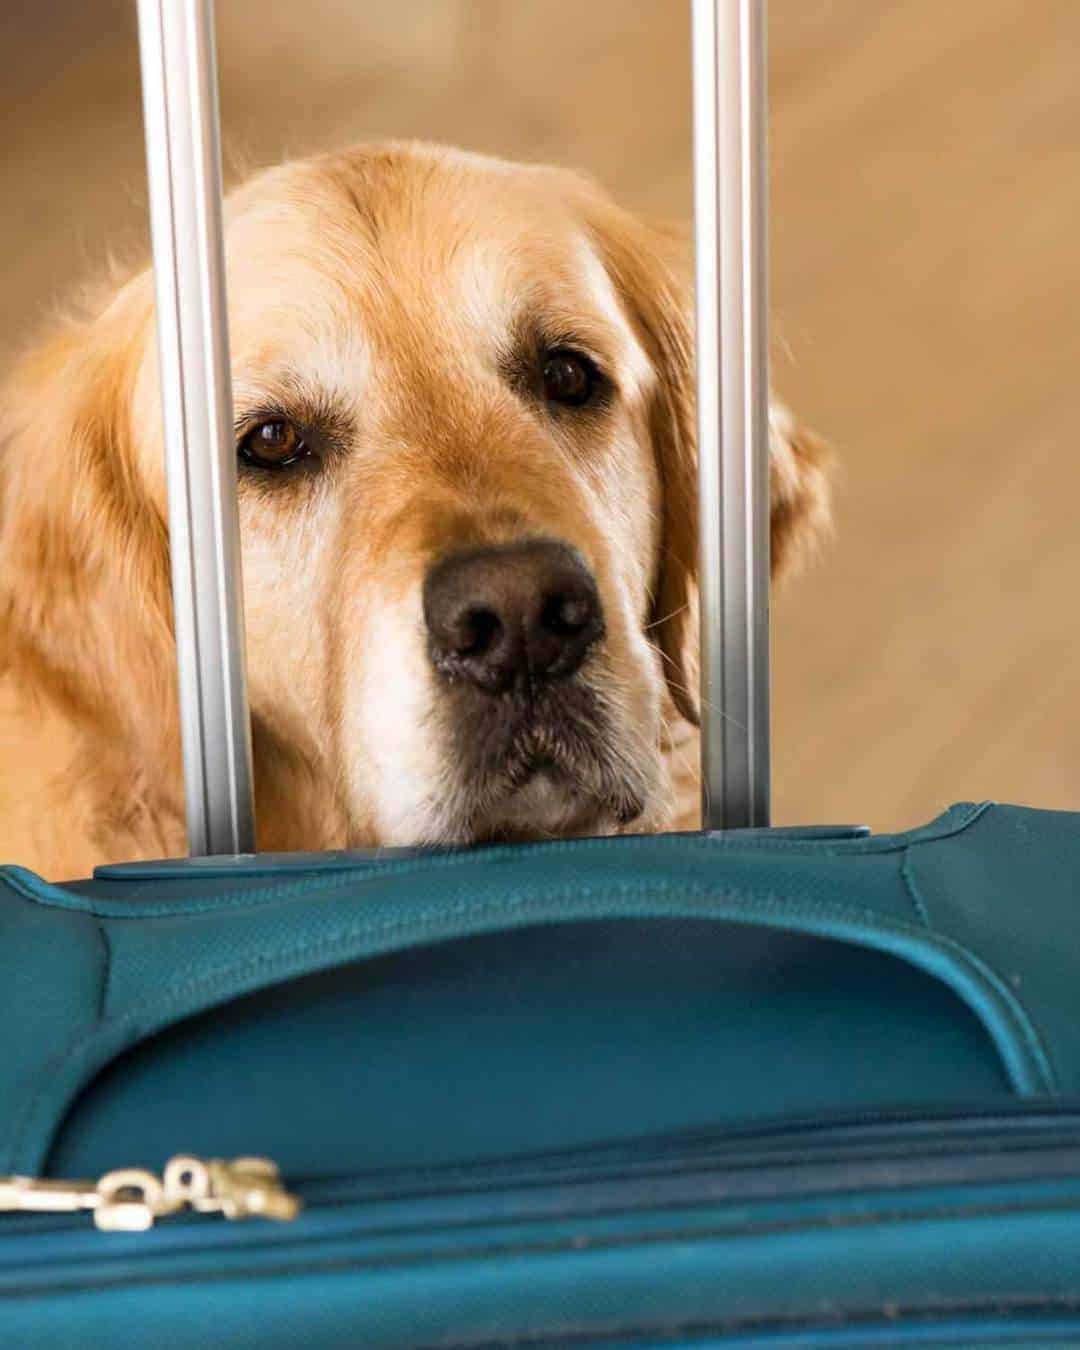 Dozer the golden retriever dog concerned at the sight of a suitcase